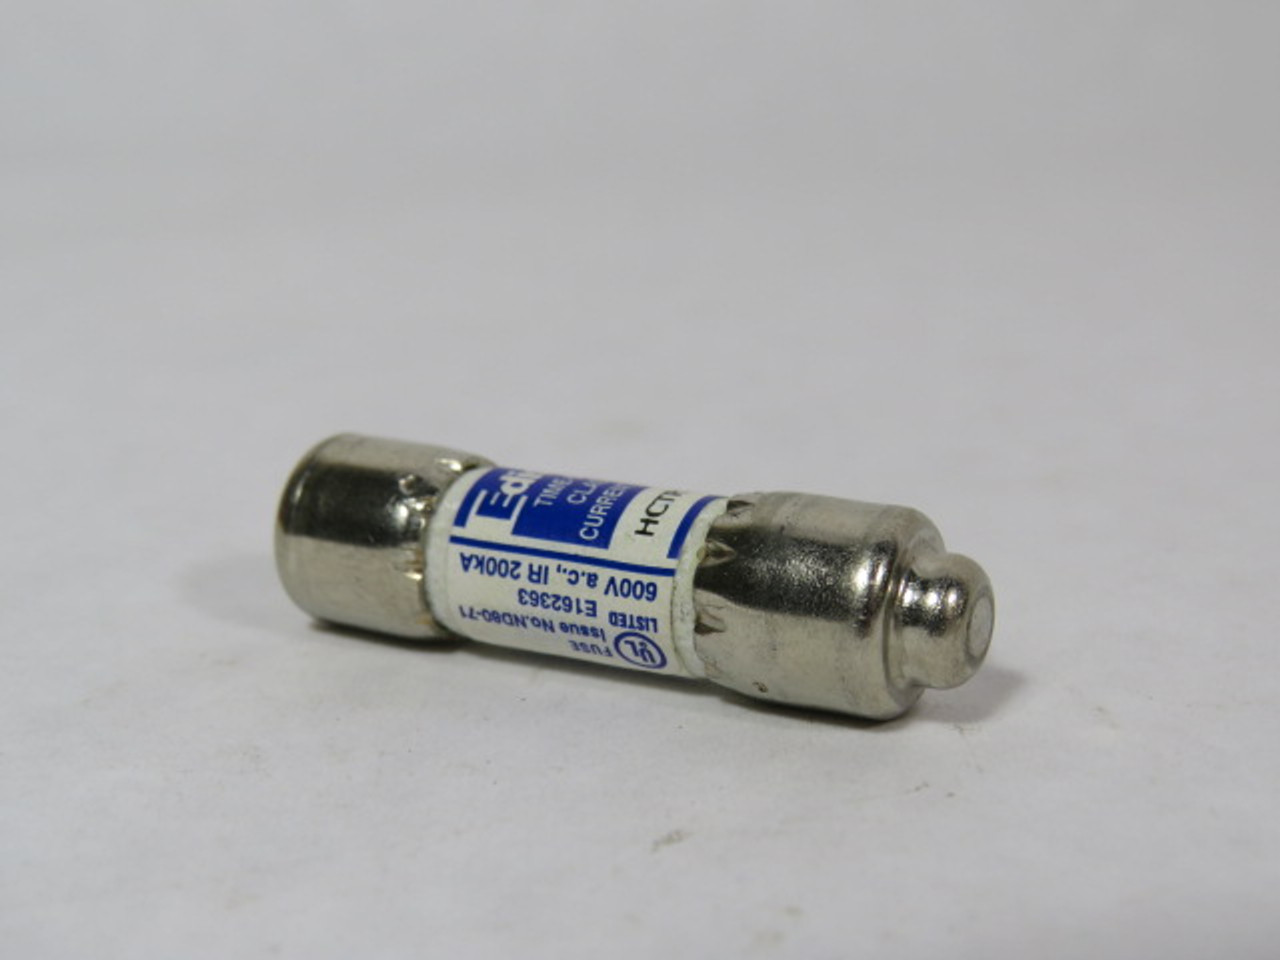 Edison HCTR5 Time Delay Fuse 5A 600V USED